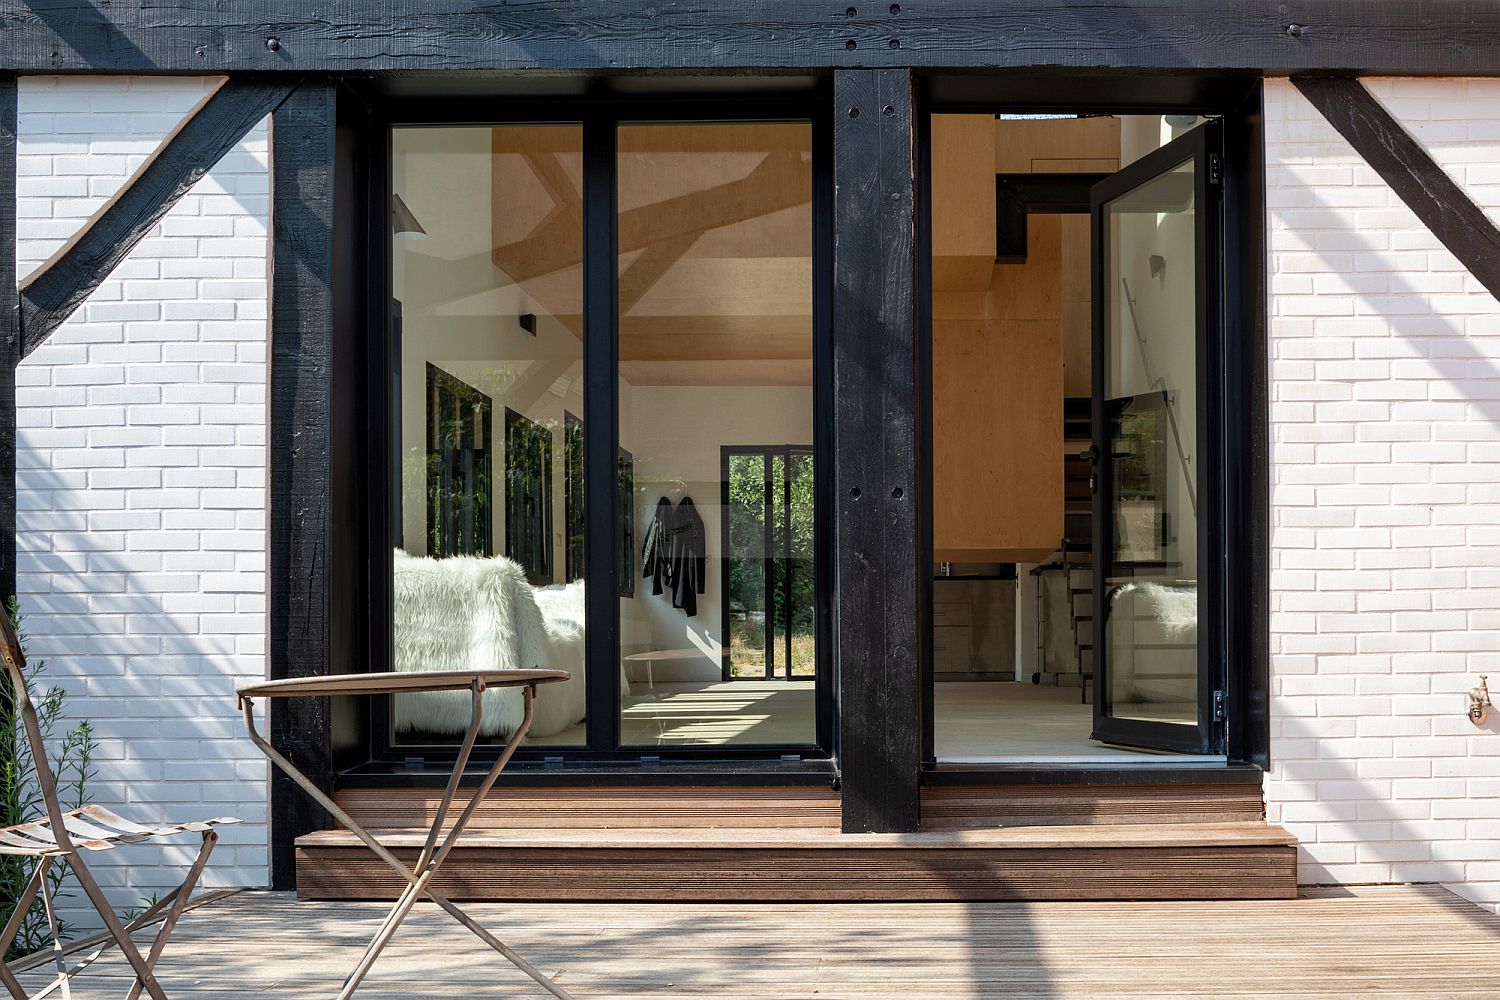 Old Carpenter?s Studio Altered into a Chic Home with Suspended Wooden Cabanas